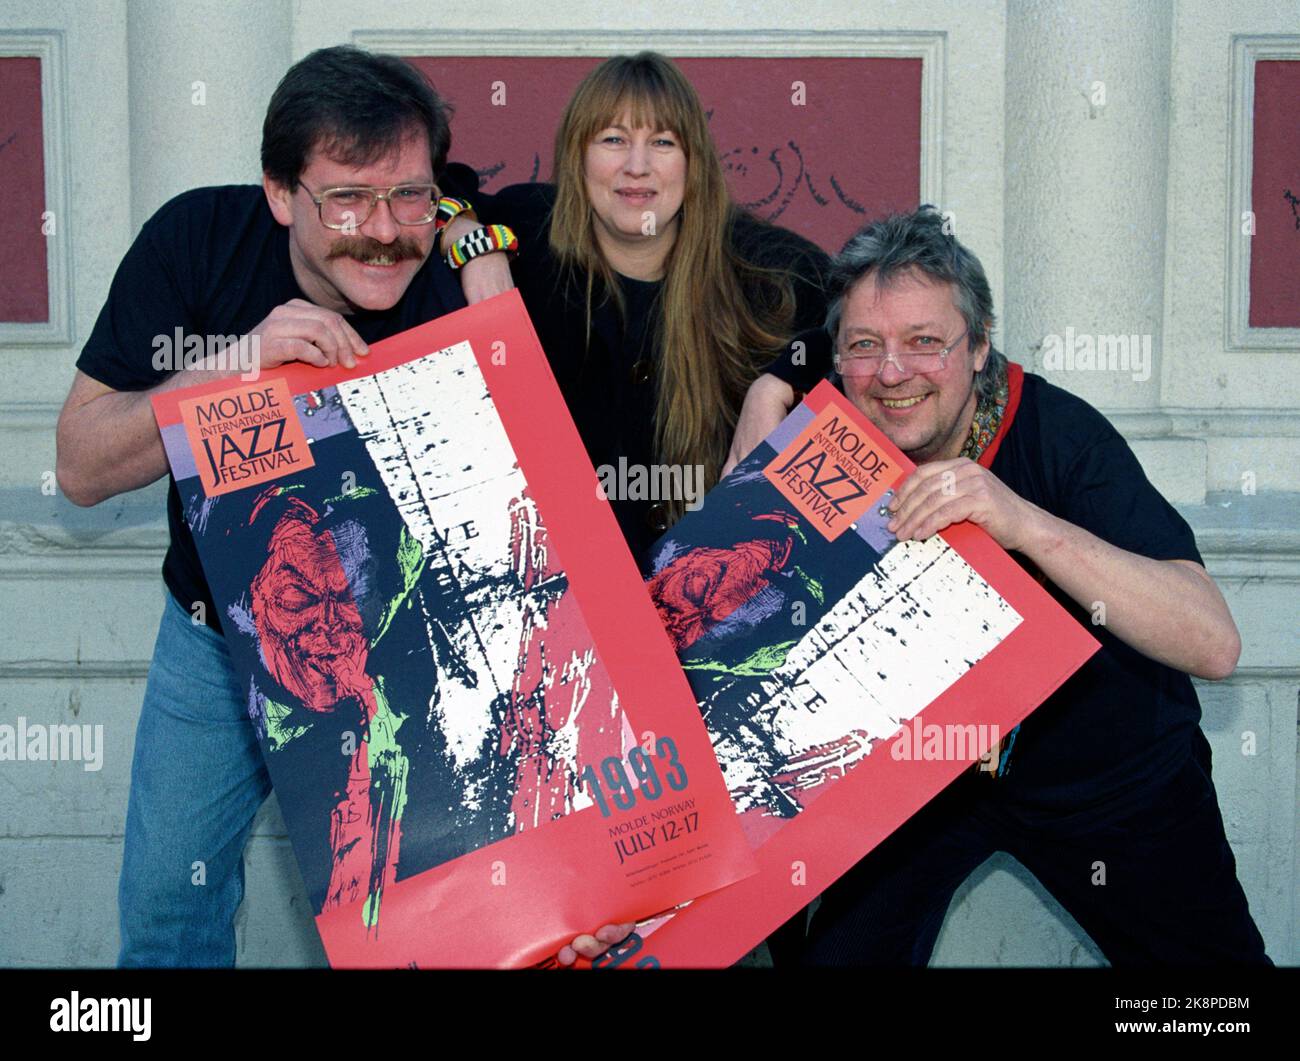 Oslo March 1993 Artist Sidsel Endresen advertises the Jazz Festival in Molde, together with Einar Gjendem and Petter Petterson. Photo: Erik Johansen / NTB Stock Photo